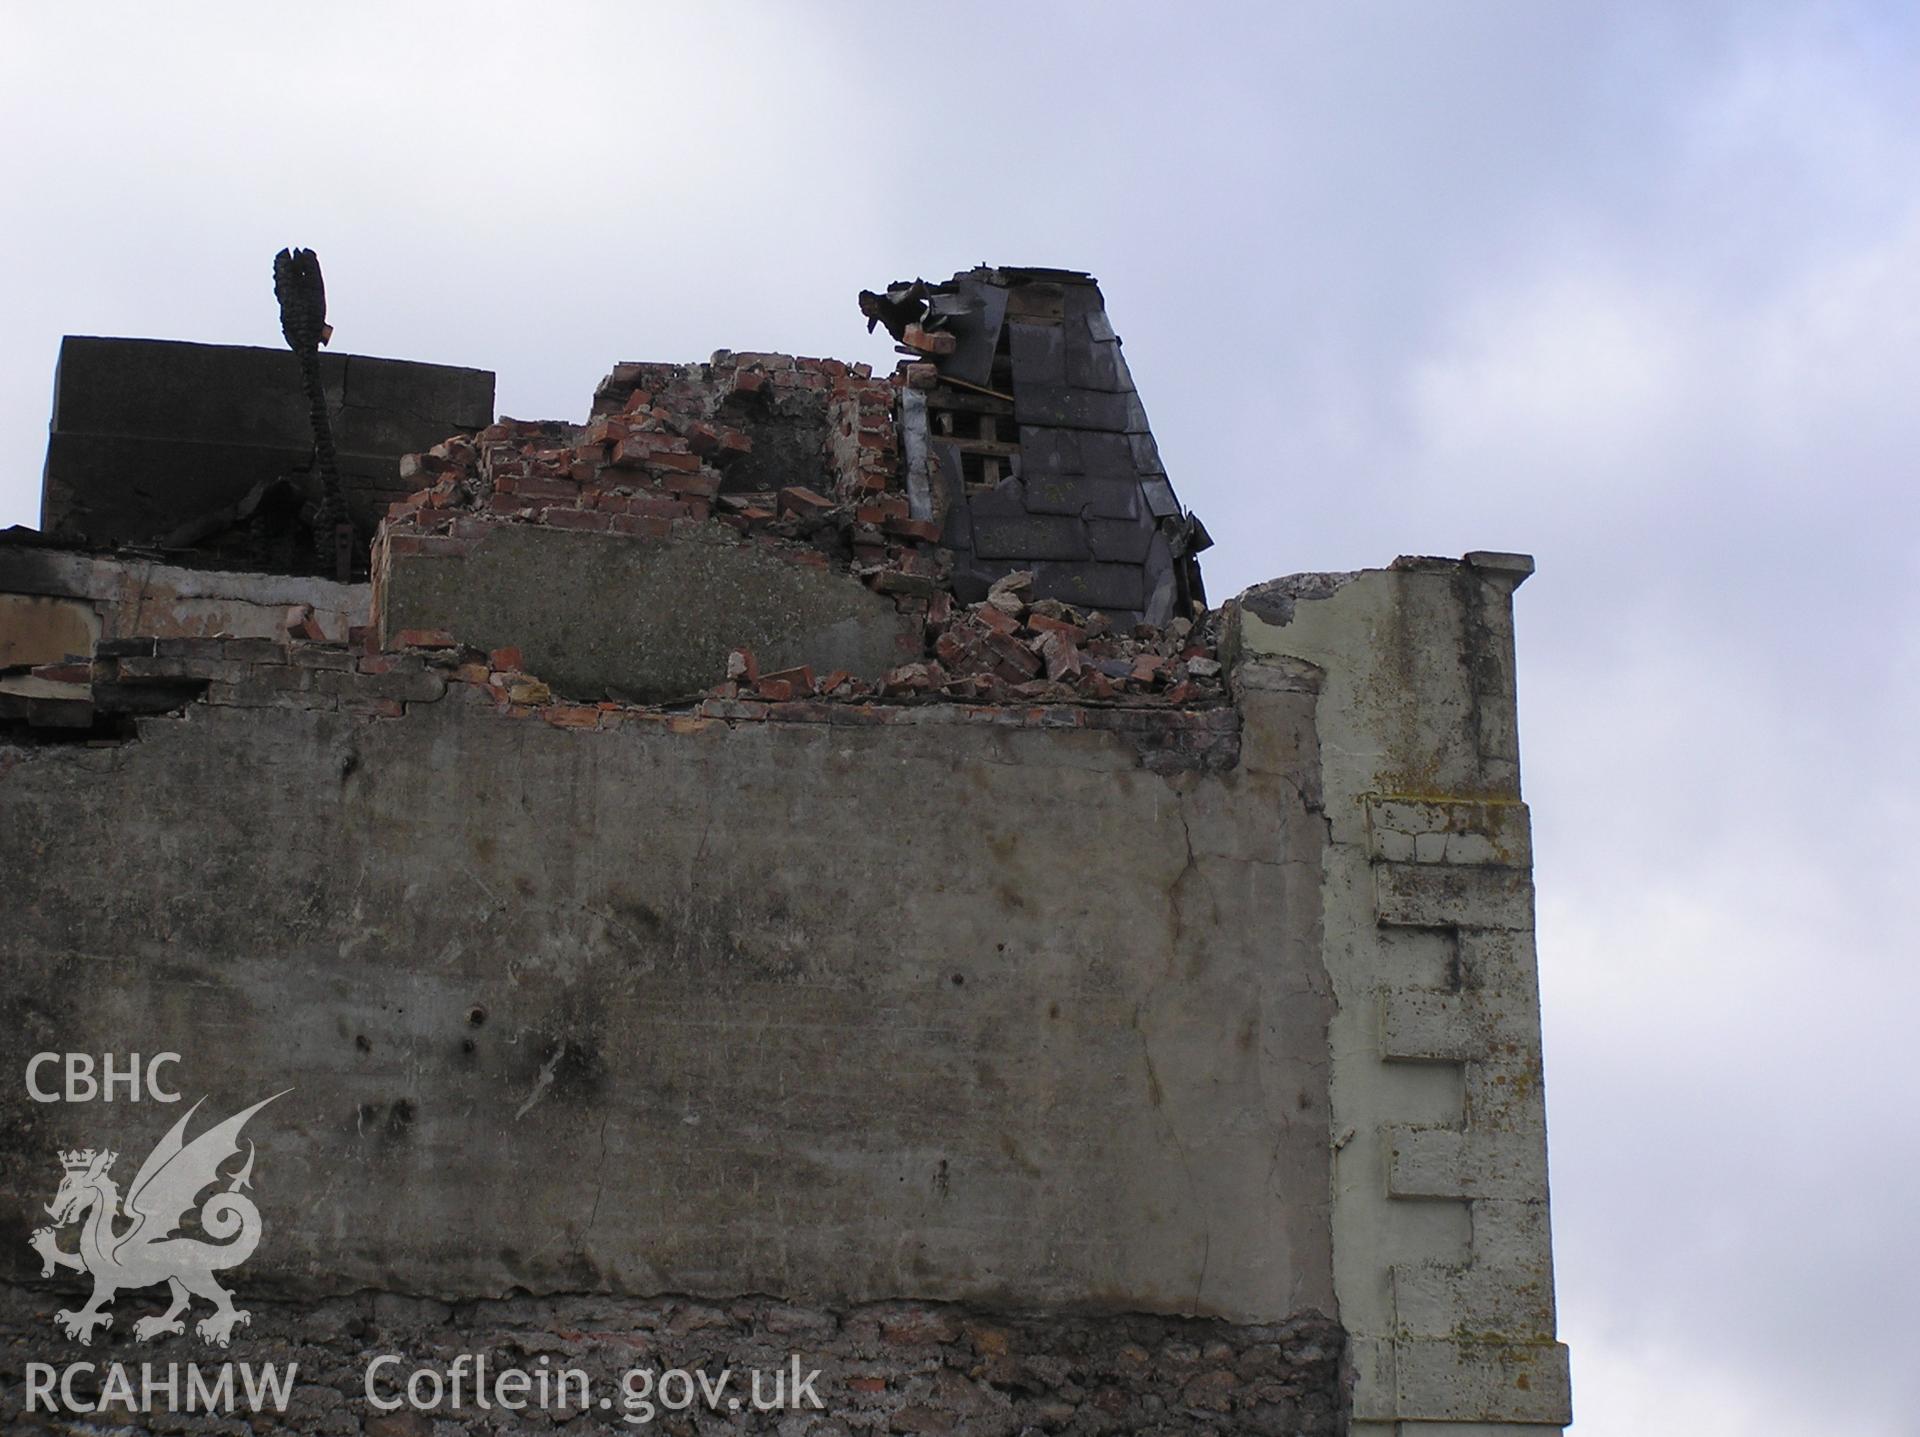 Colour digital photograph showing the wreckage of the Royal Gatehouse Hotel.